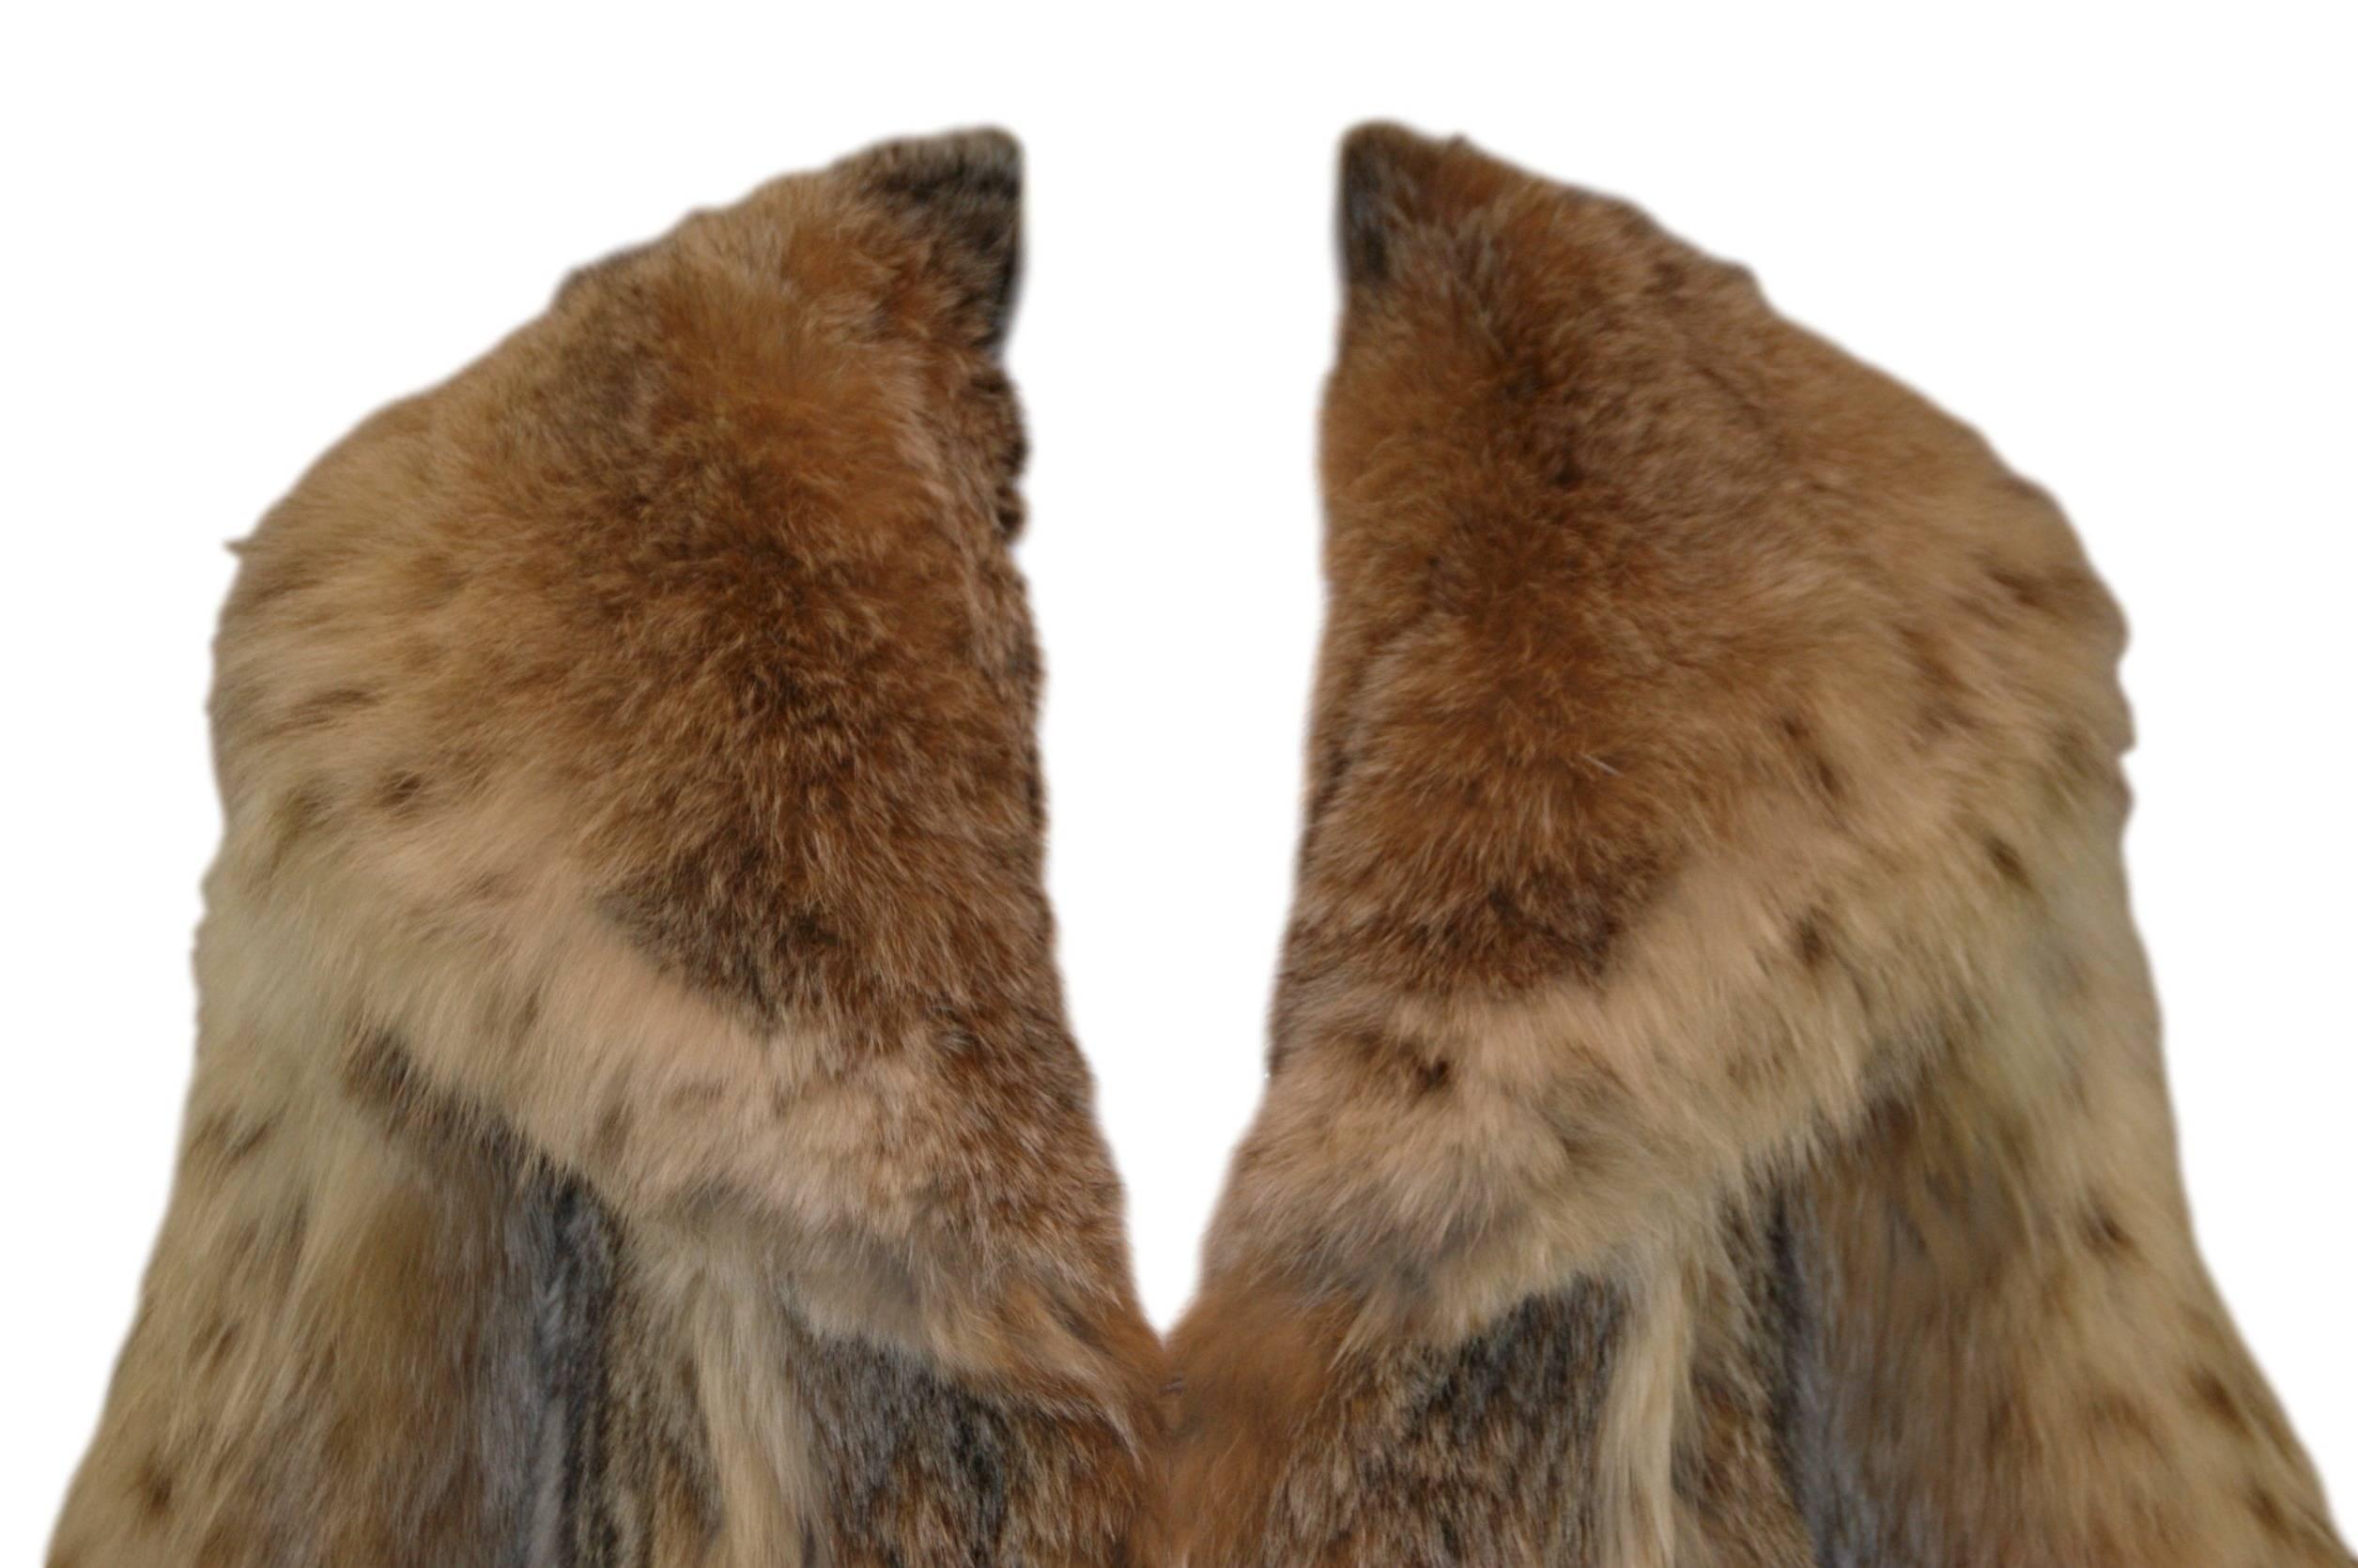 DESIGNER: 1980's Galanos

Please contact for more information and/or photos.

CONDITION: Good- fur is excellent- minor imperfections on lining.  Please see provided photos. 

MATERIAL: LYNX- CLIENT SAYS IT IS RUSSIAN LYNX BUT WE ARE NOT 100% SURE IF